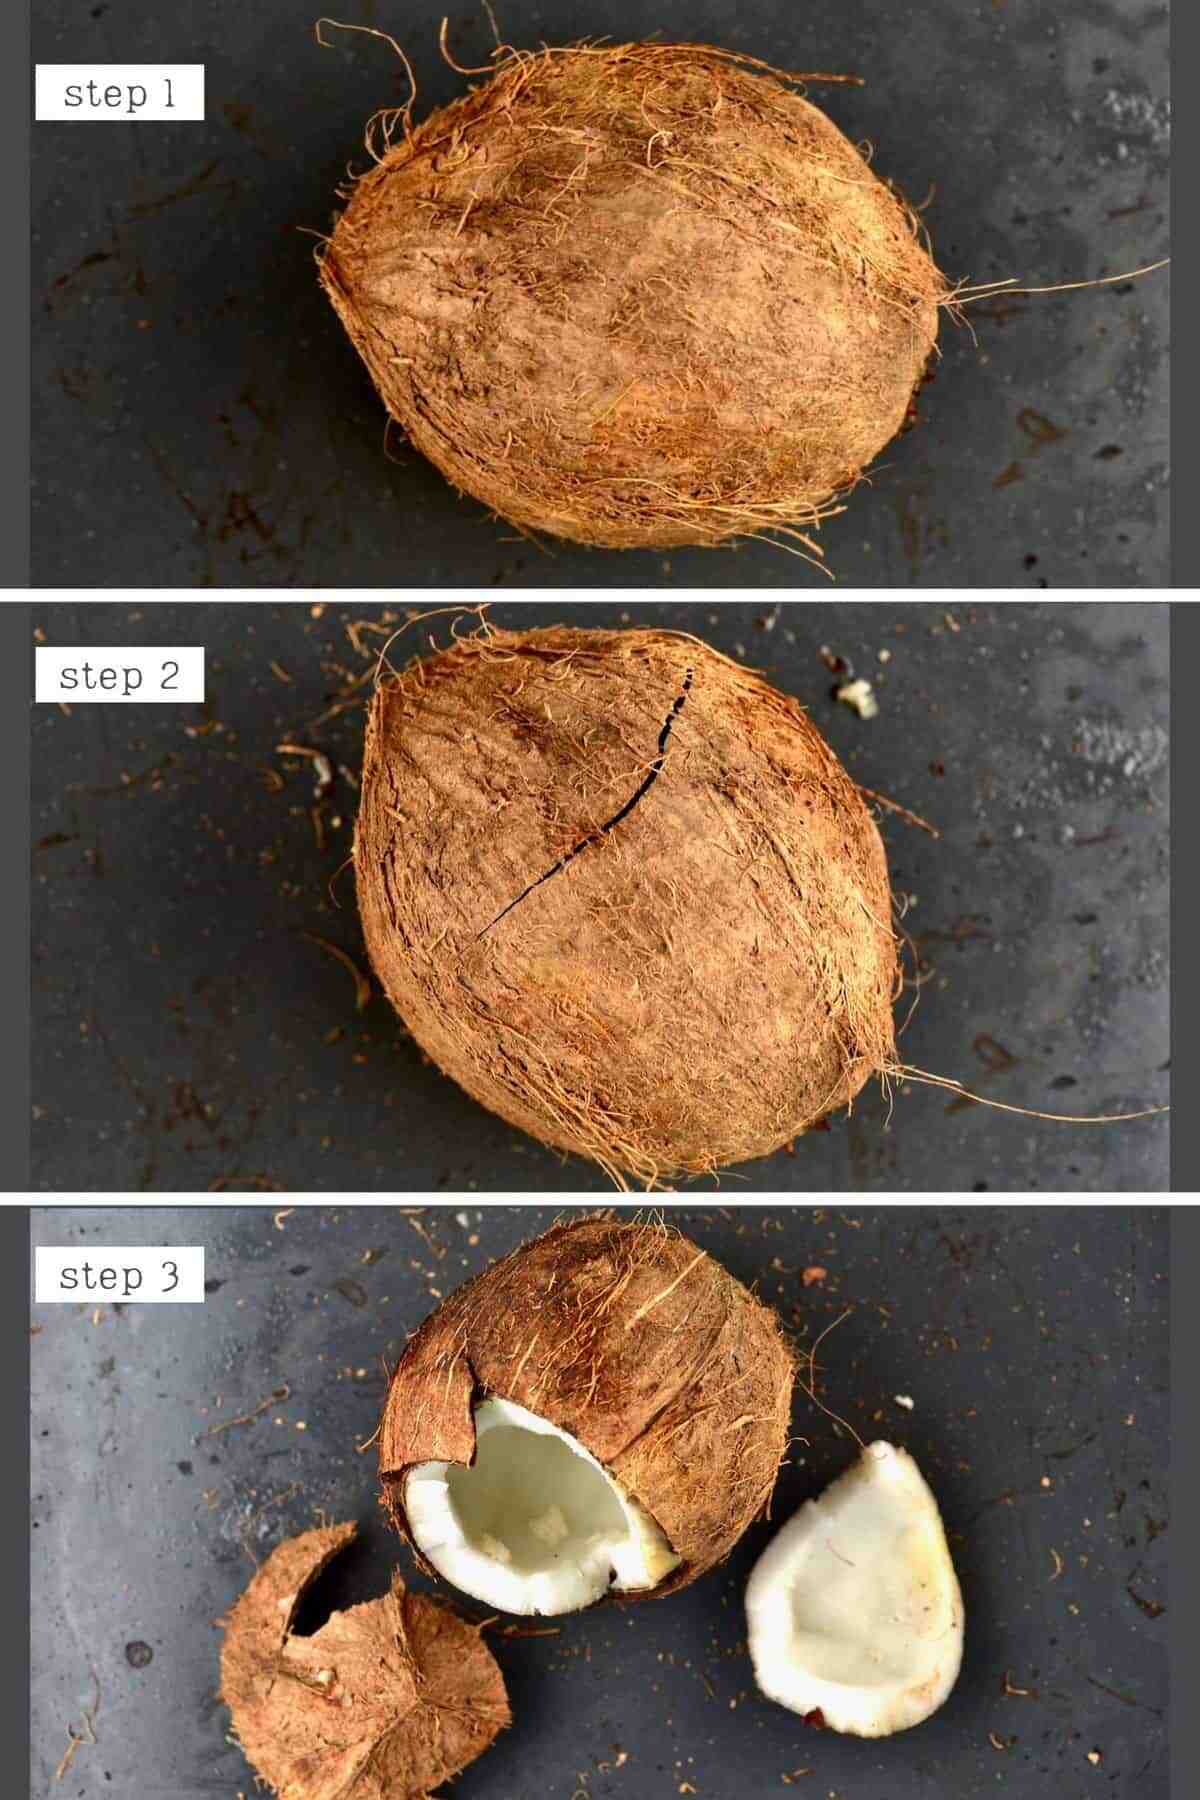 How do you open a coconut at home?